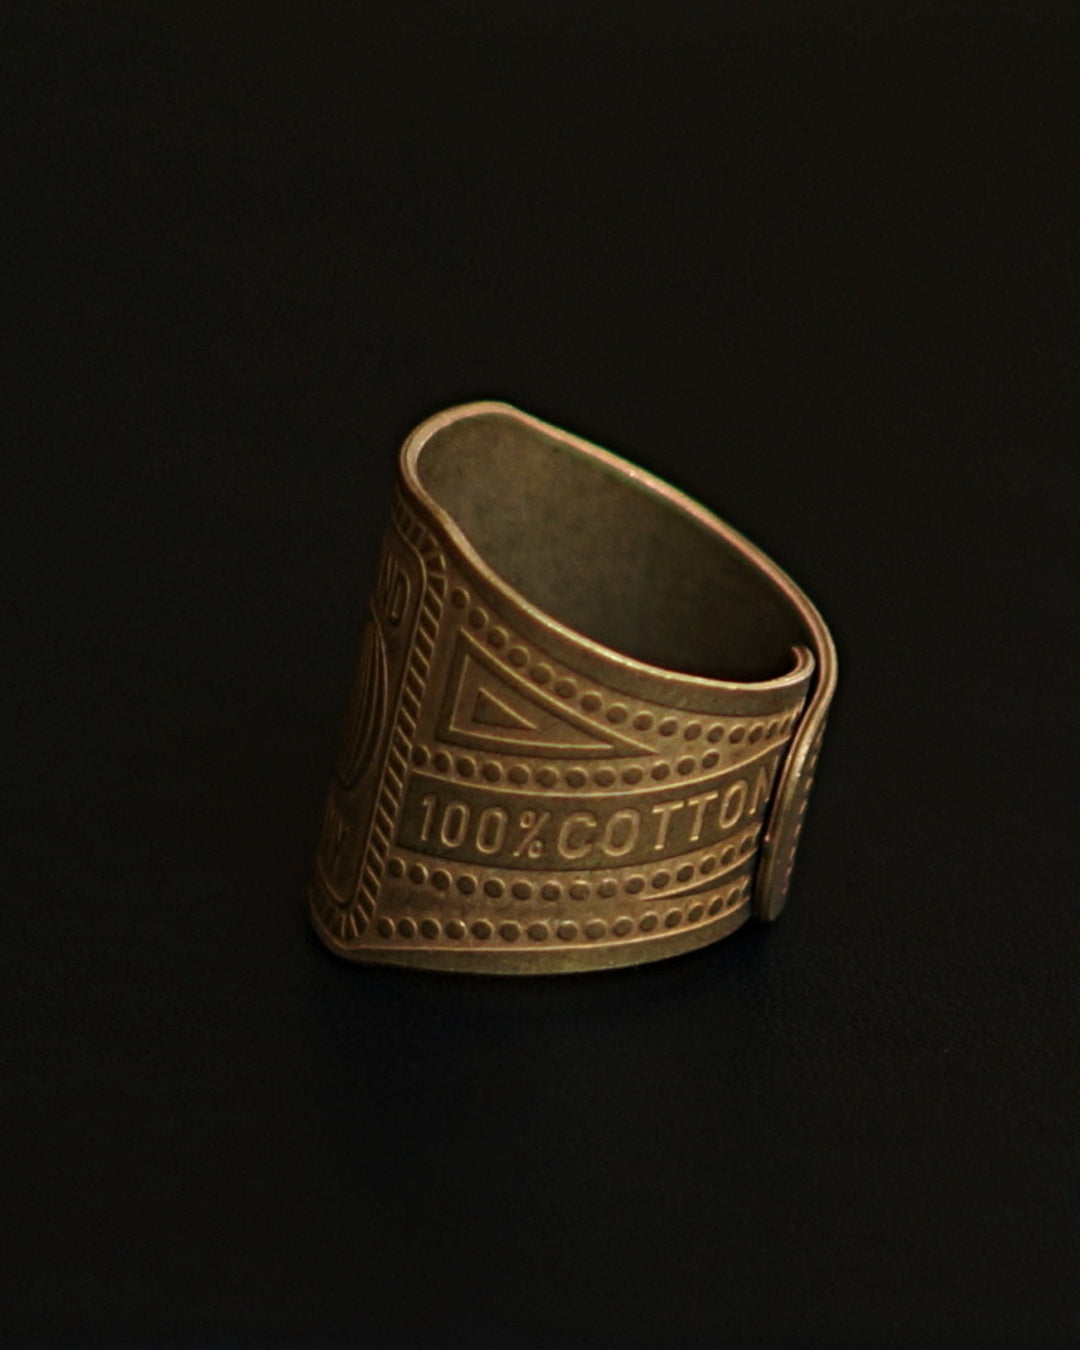 GLADHAND & Co. | CIGAR TAG RING - Gold No.02